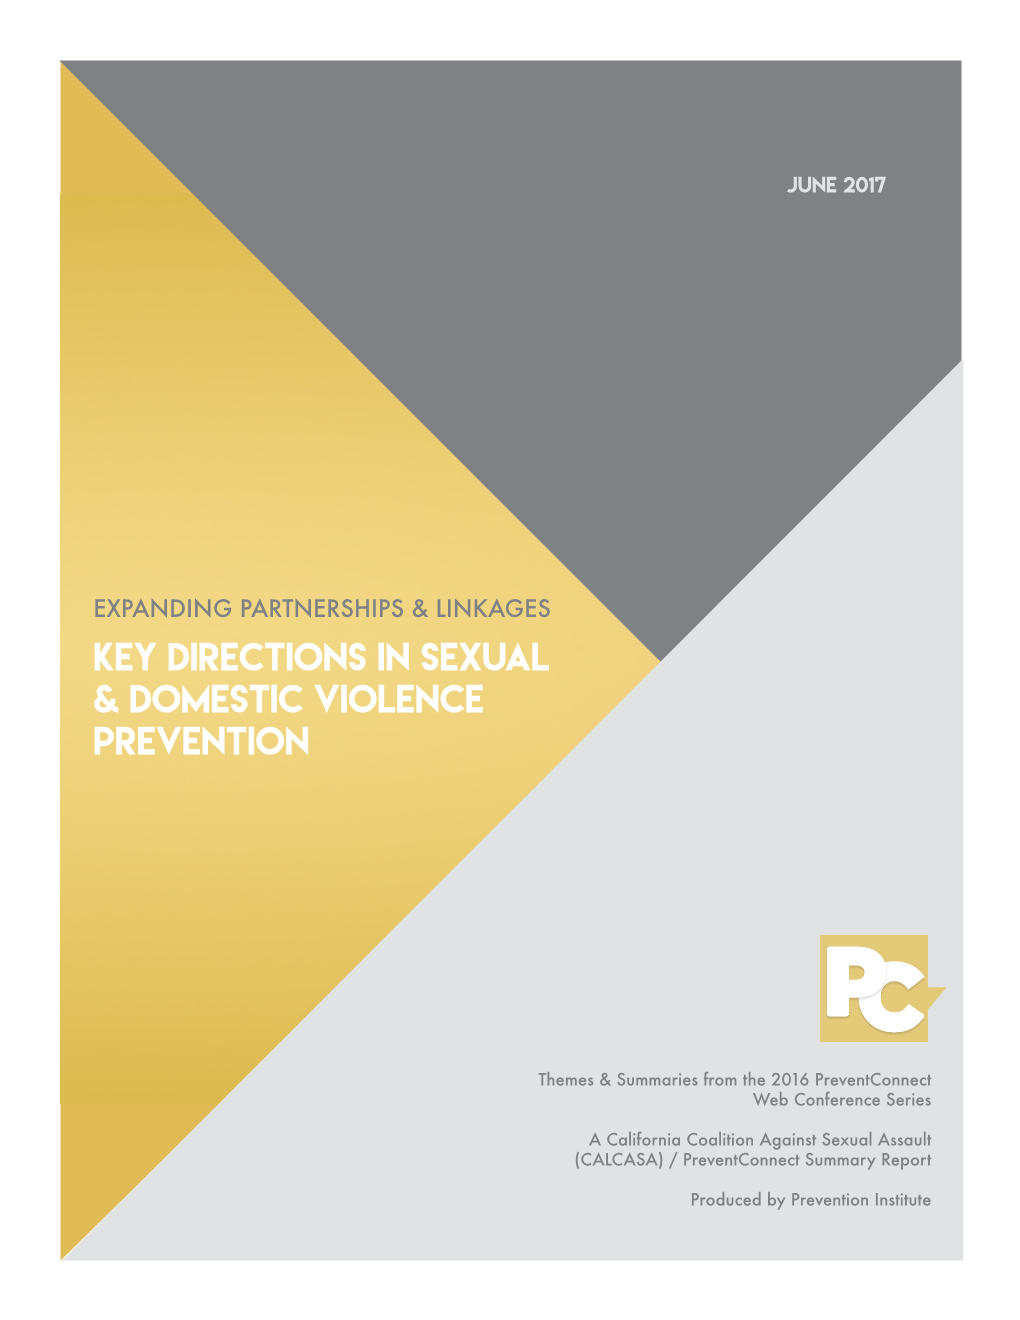 Key Directions in Sexual & Domestic Violence Prevention